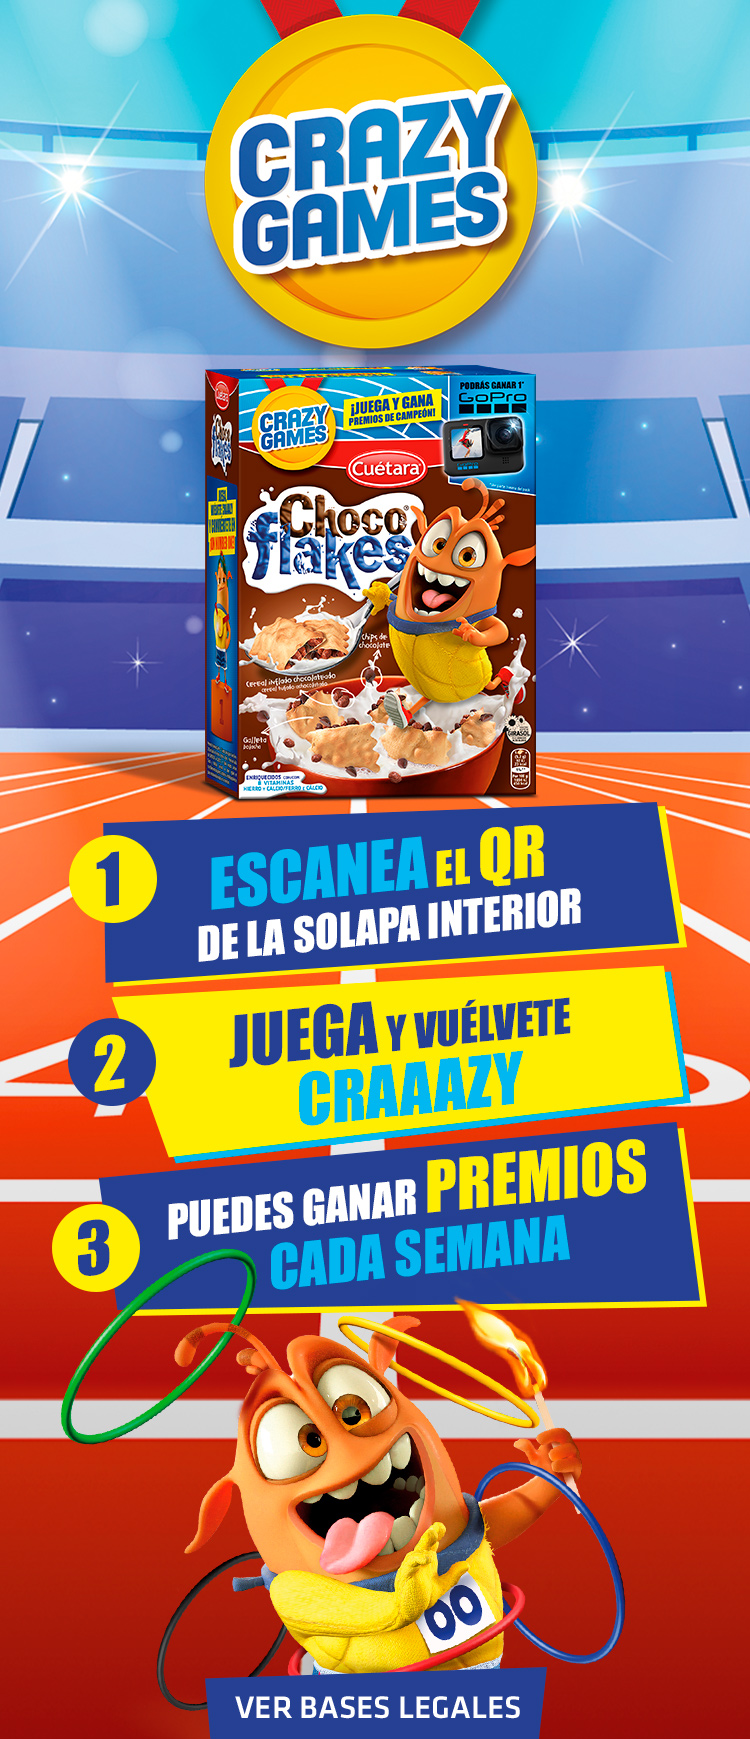 Crazzy Games. Ver bases legales